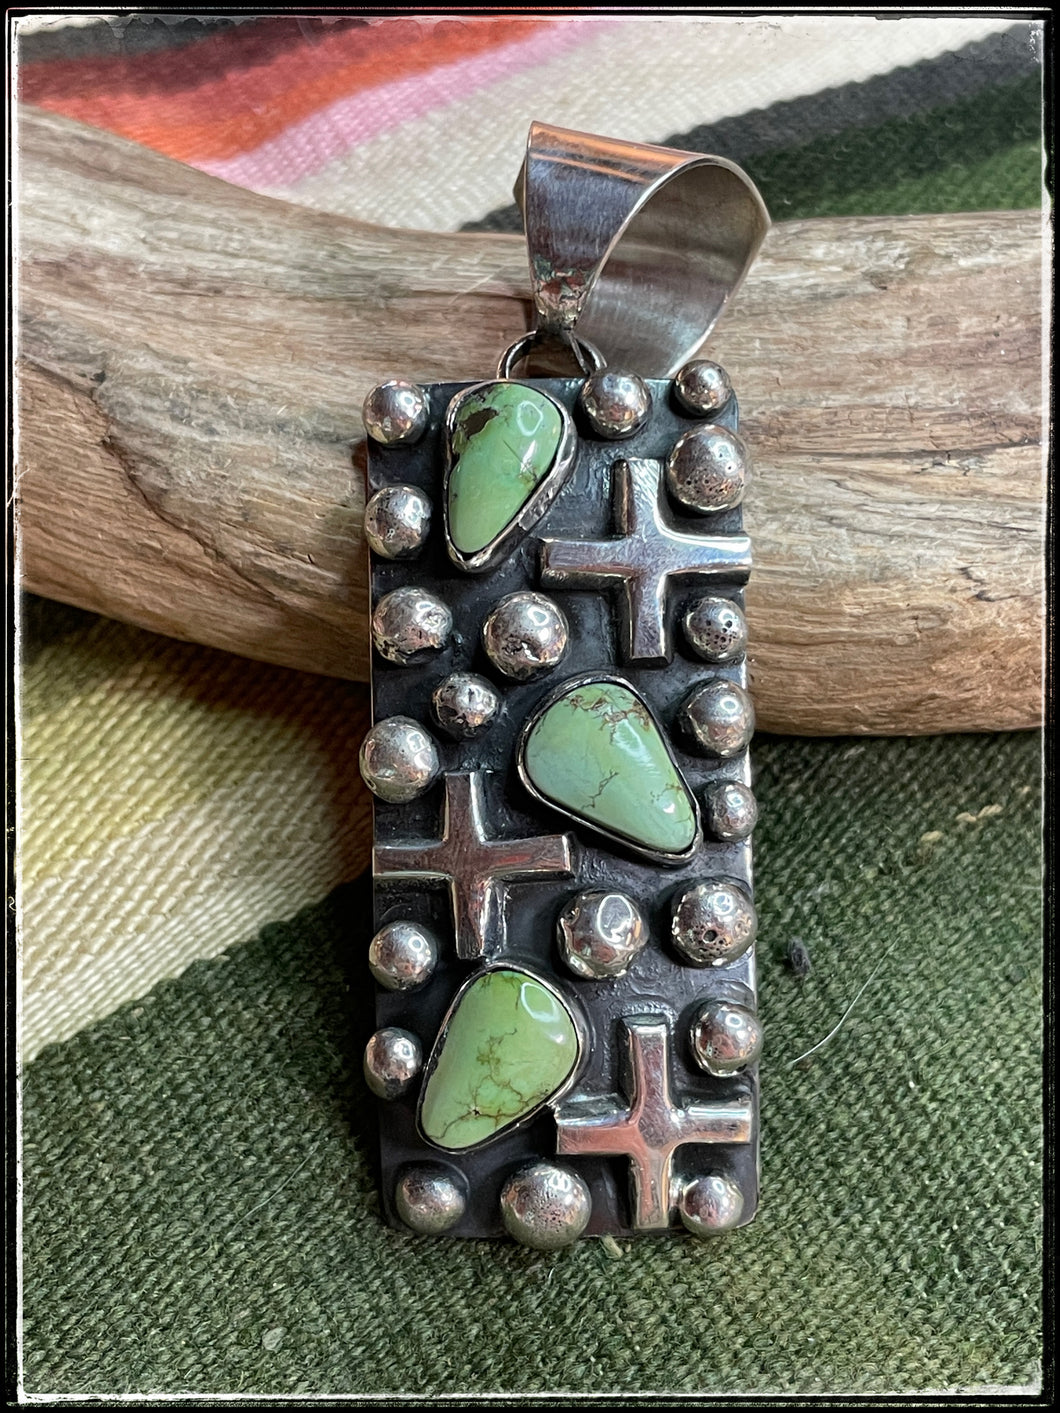 Chimney Butte cross and dot pendants with stones